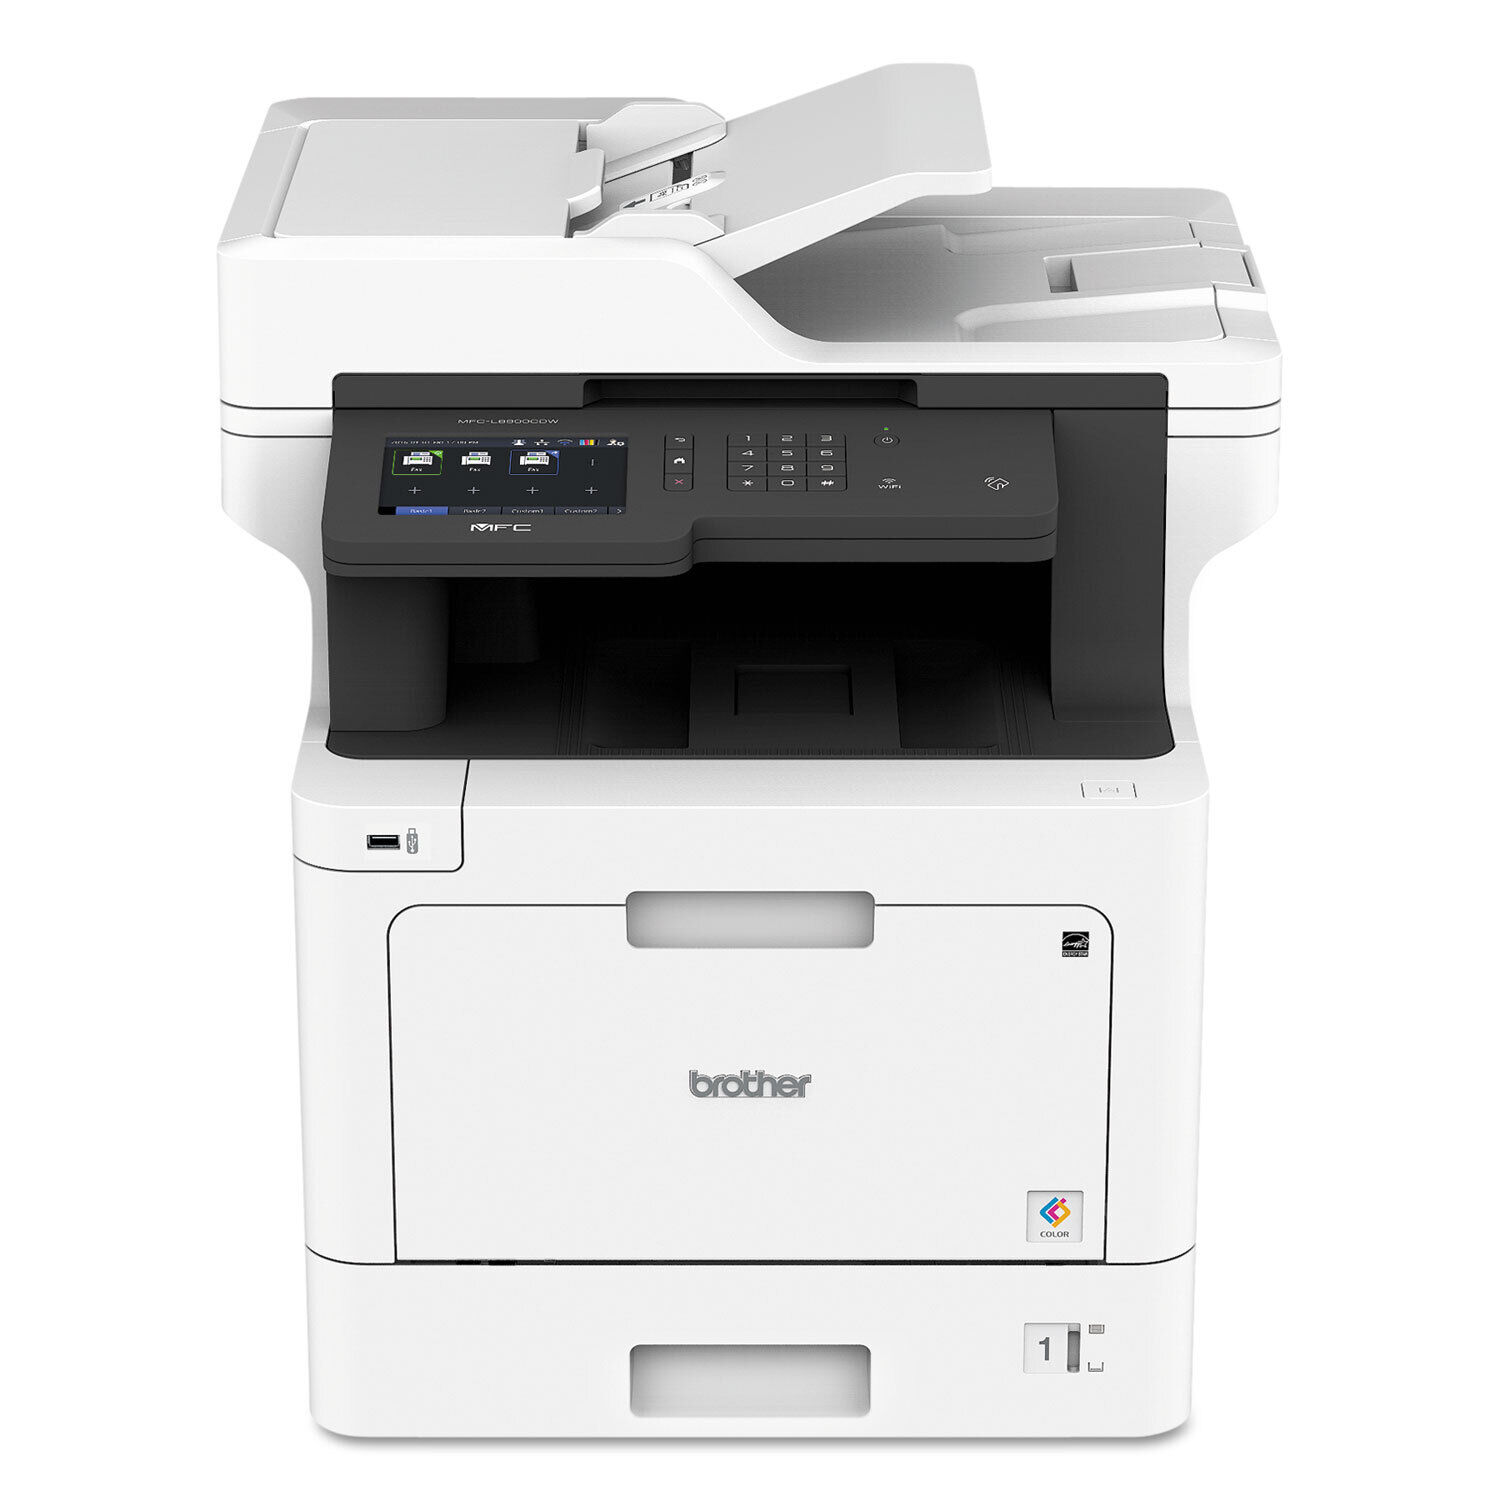 Brother MFC-L8900CDW Business Color Laser All-in-One Copy/Fax/Print/Scan